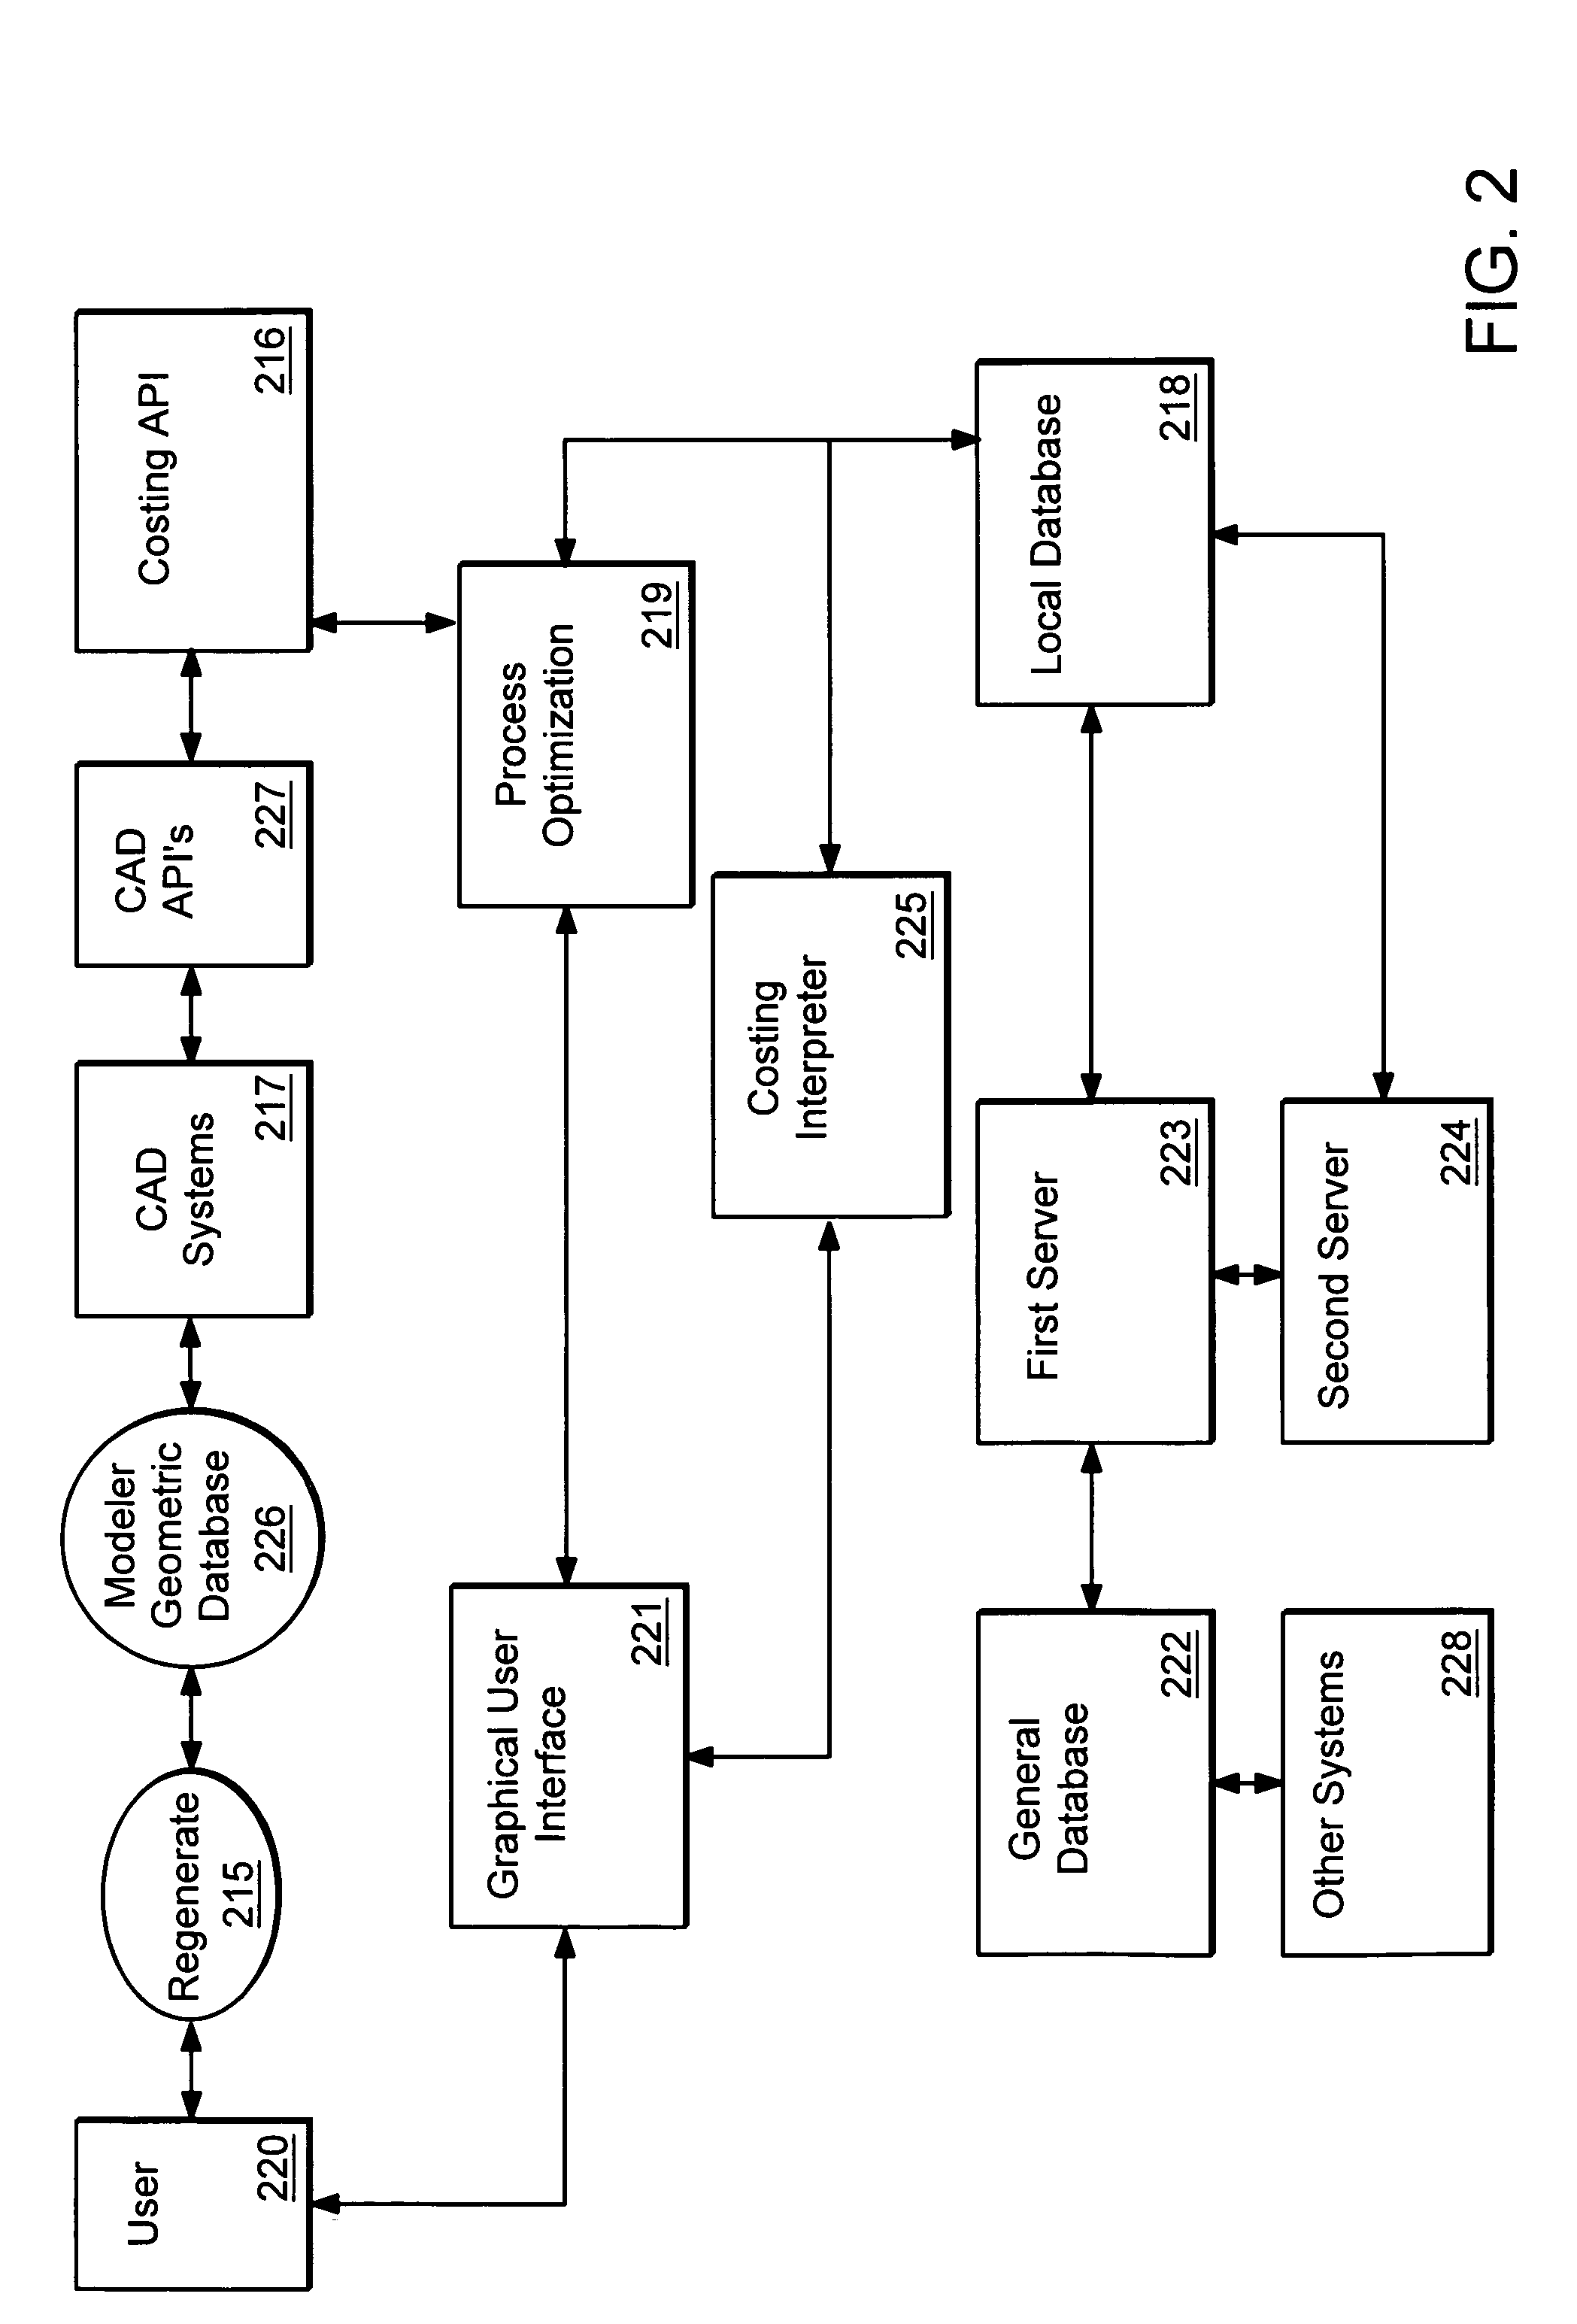 System and method for determining costs within an enterprise